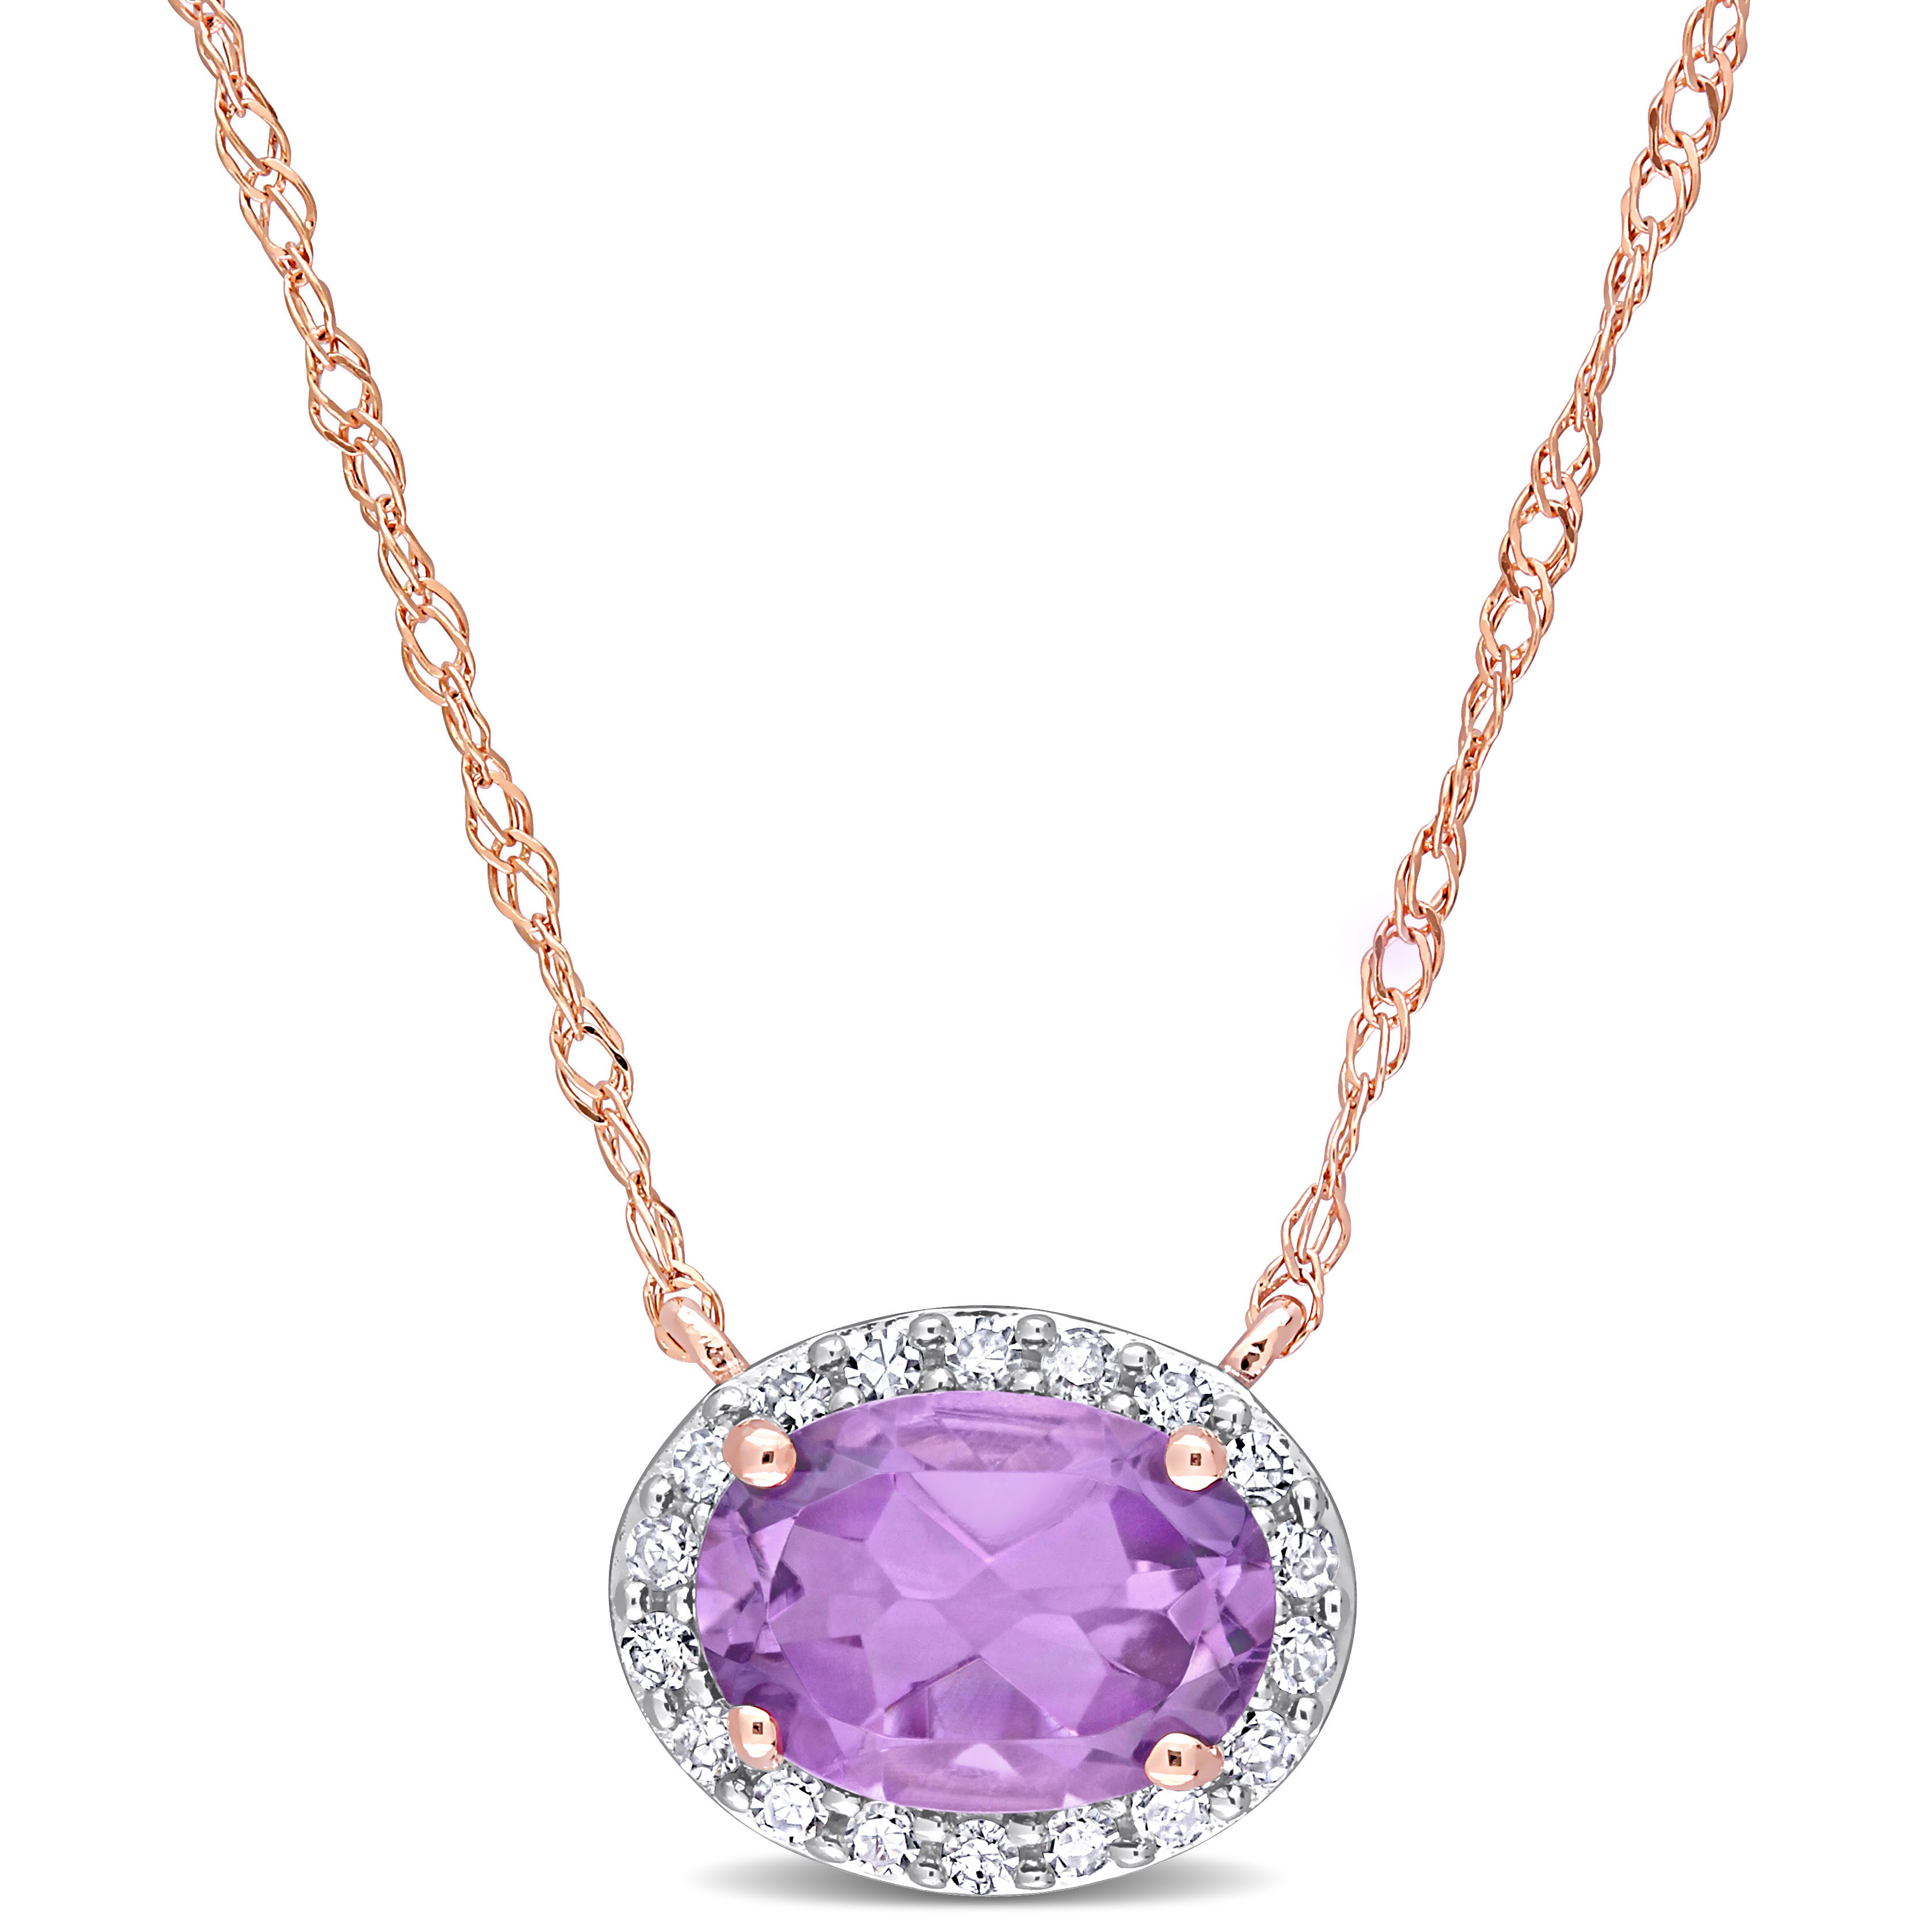 3/4 CT TGW Oval Amethyst and 1/10 CT TW Diamond Halo Necklace in 10k Rose Gold - 17 in.